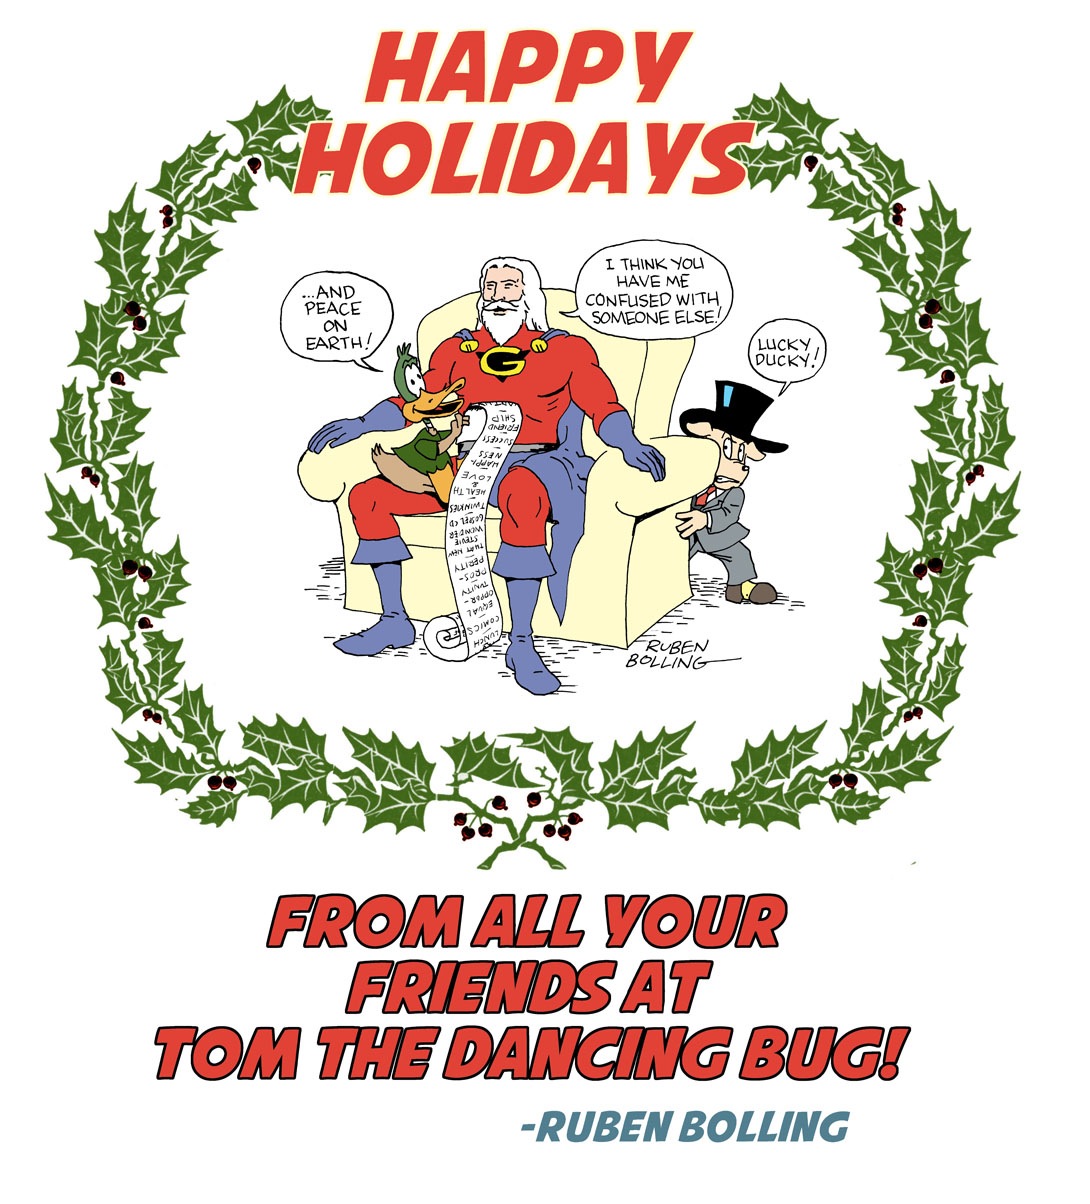 2012 holiday card email.jpg